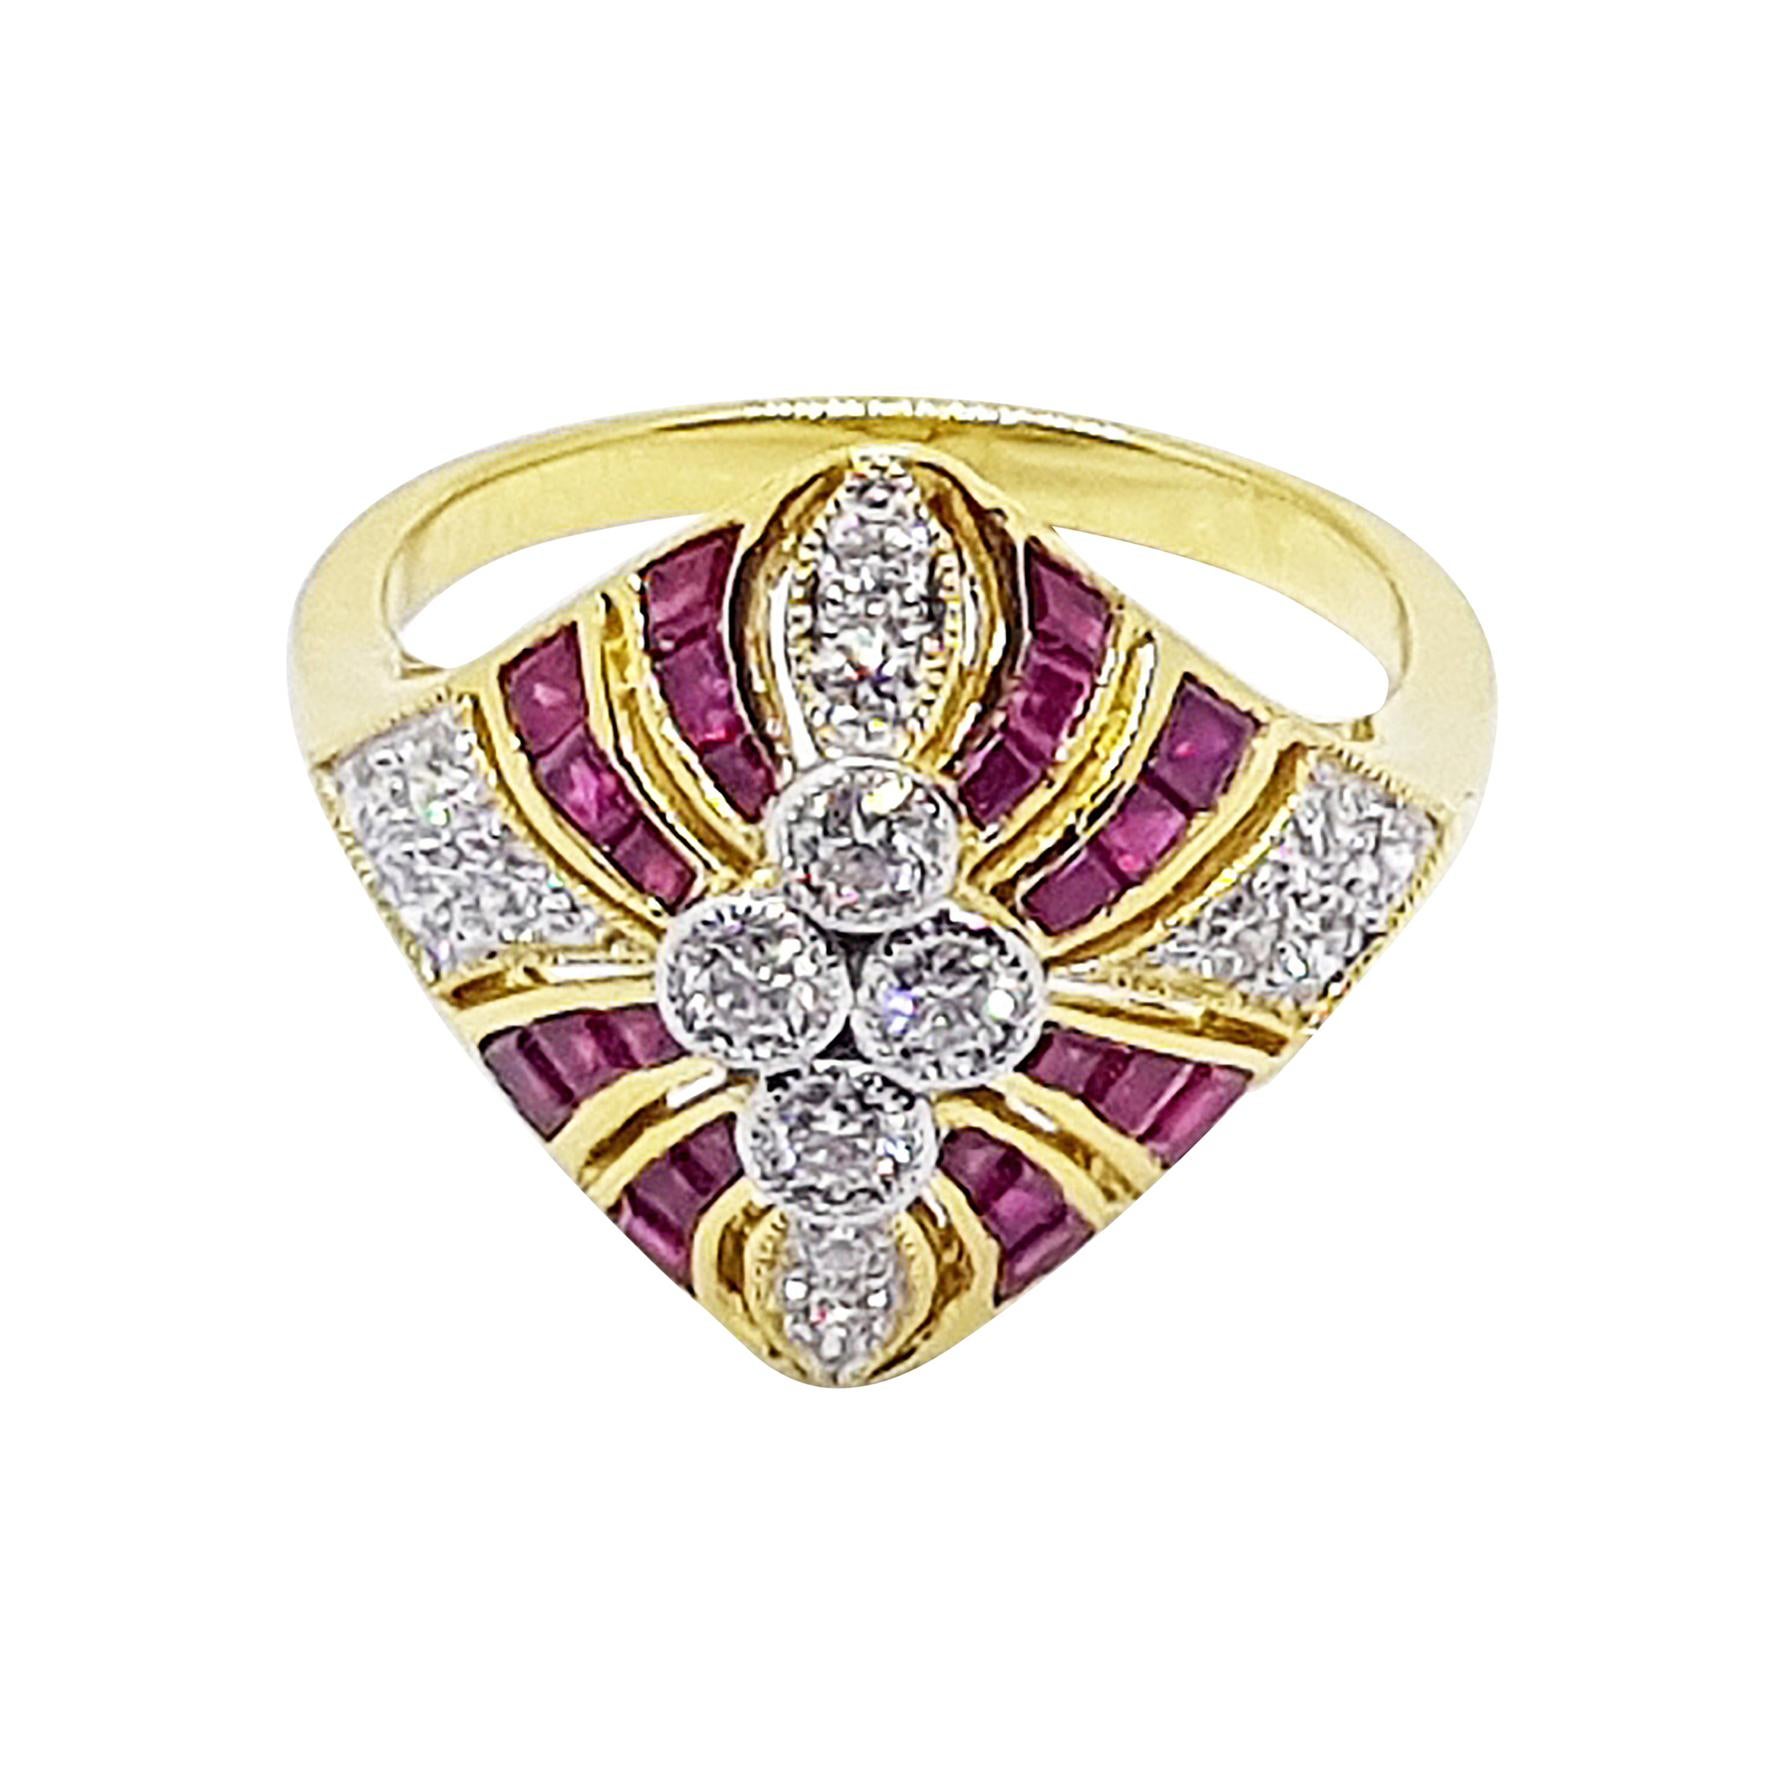 Ruby with Diamond Ring Set in 18 Karat Gold Settings For Sale